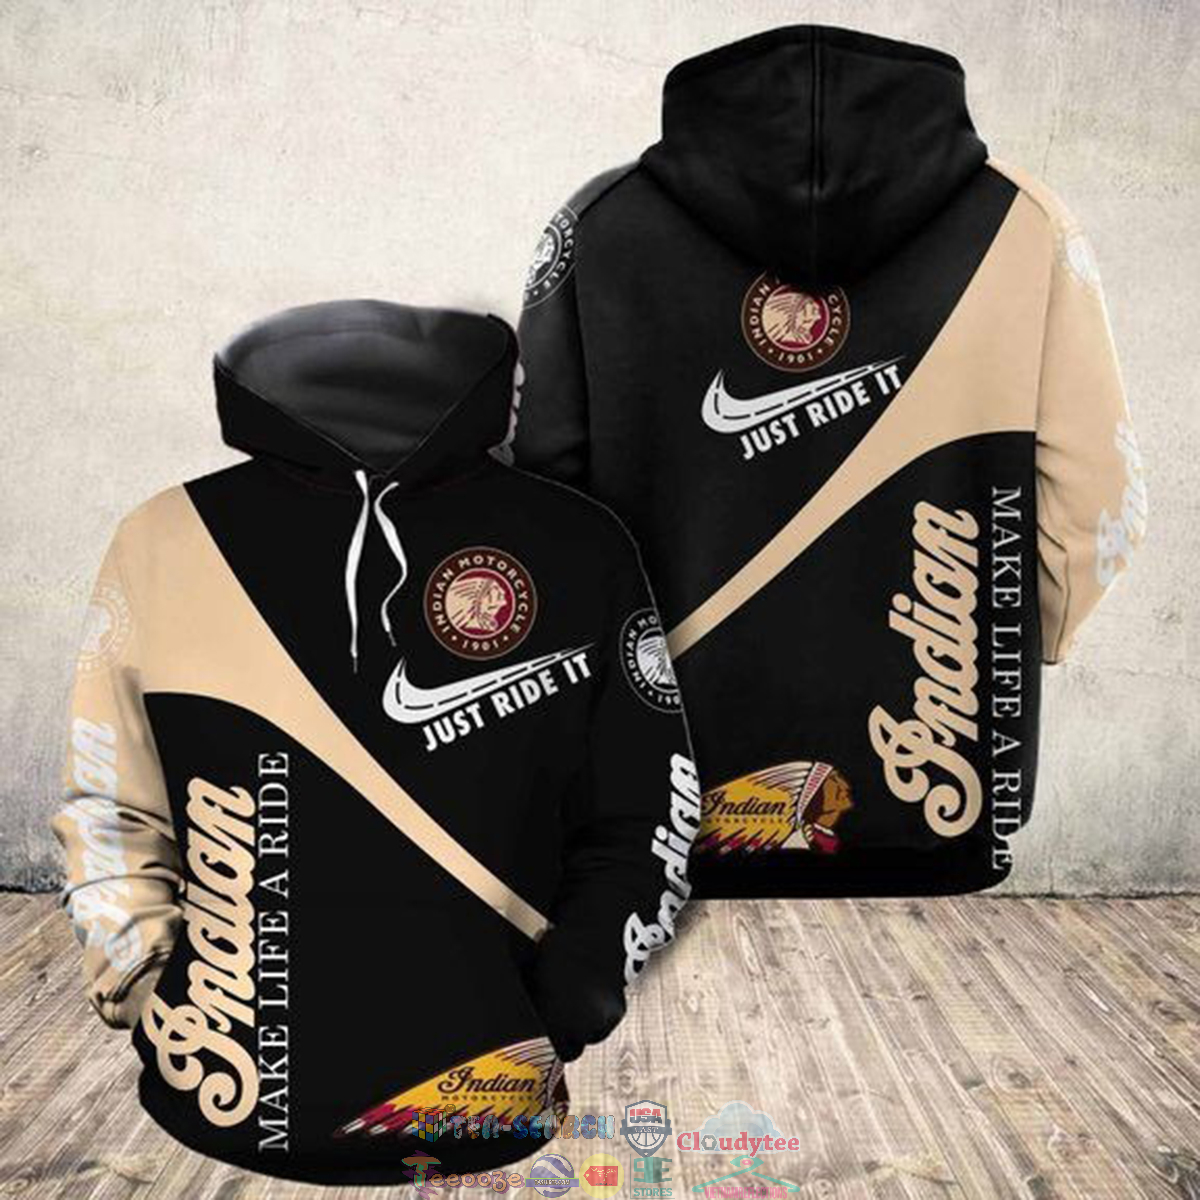 Indian Motorcycle Just Ride It 3D hoodie and t-shirt – Saleoff